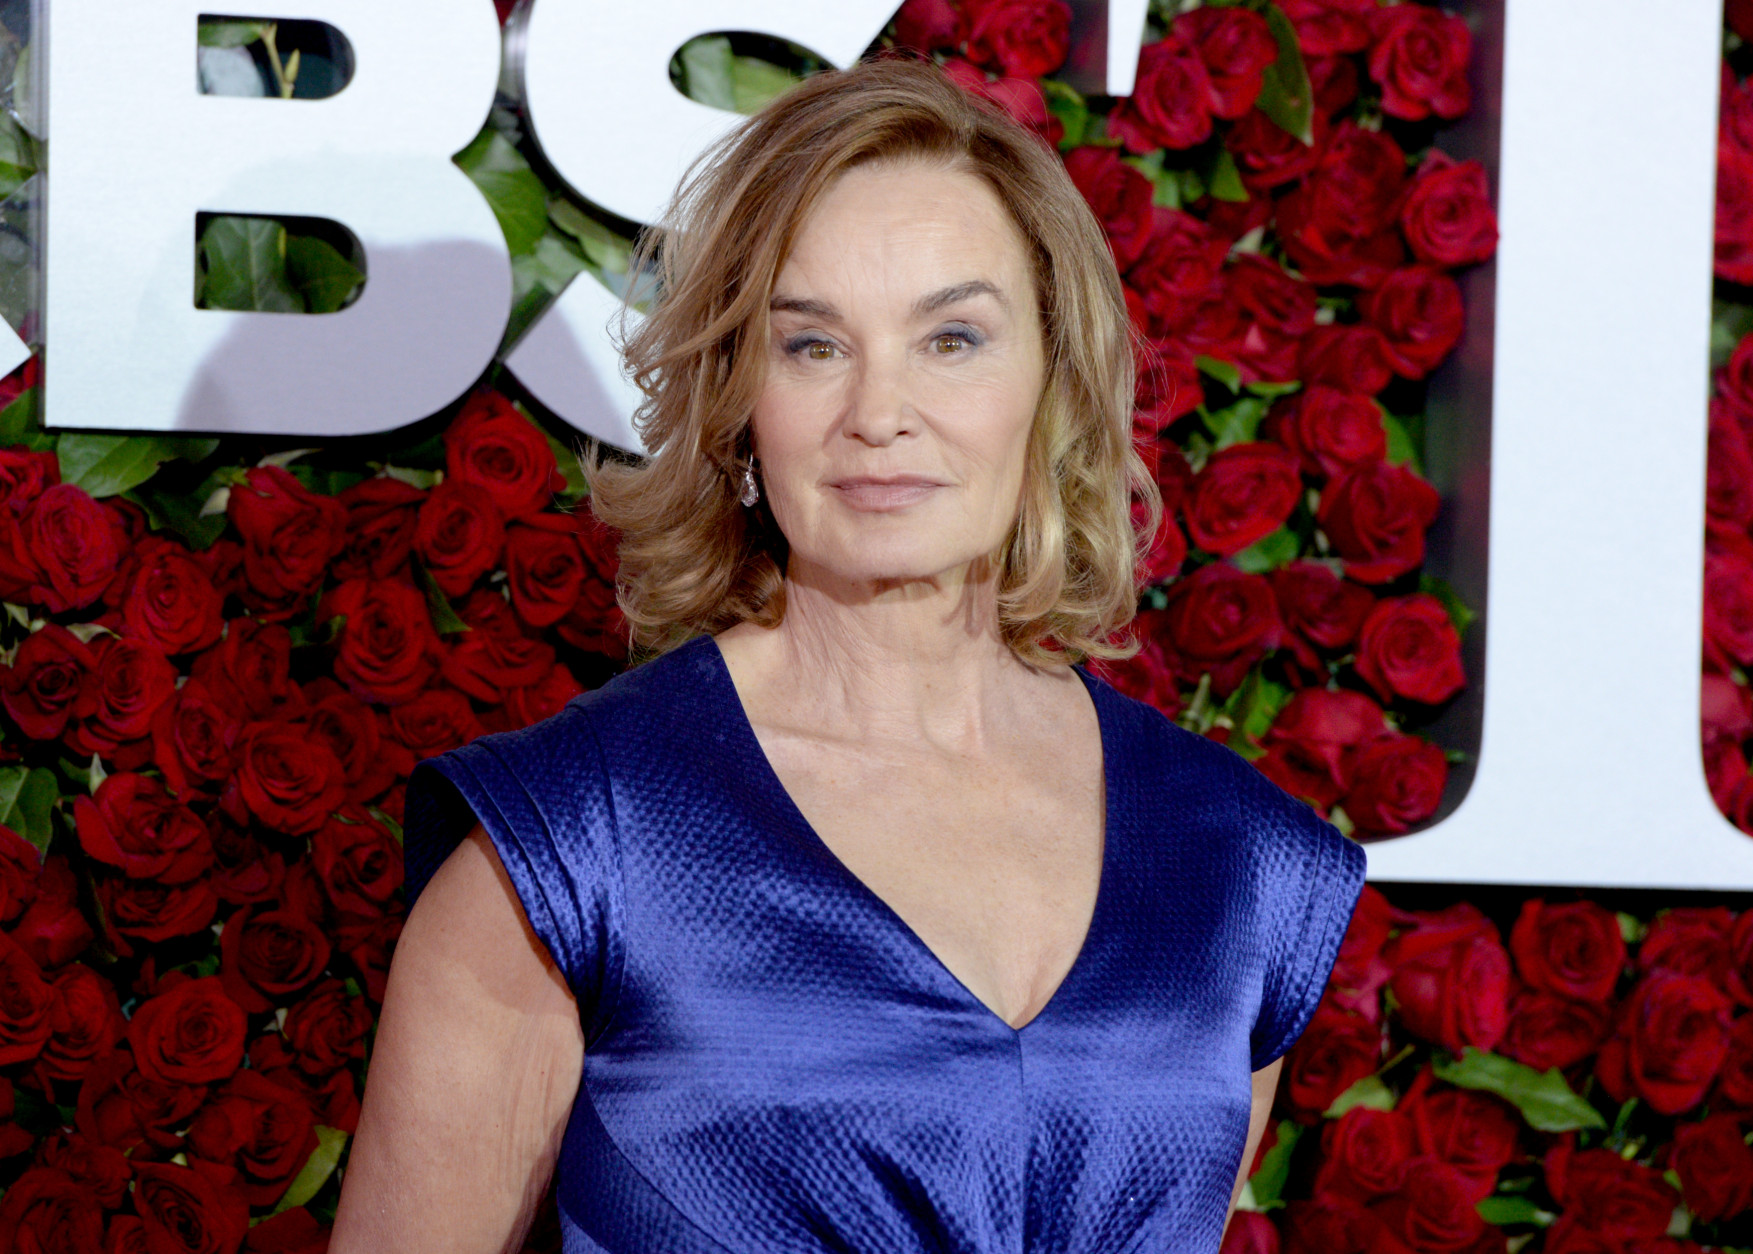 Jessica Lange arrives at the Tony Awards at the Beacon Theatre on Sunday, June 12, 2016, in New York. (Photo by Charles Sykes/Invision/AP)